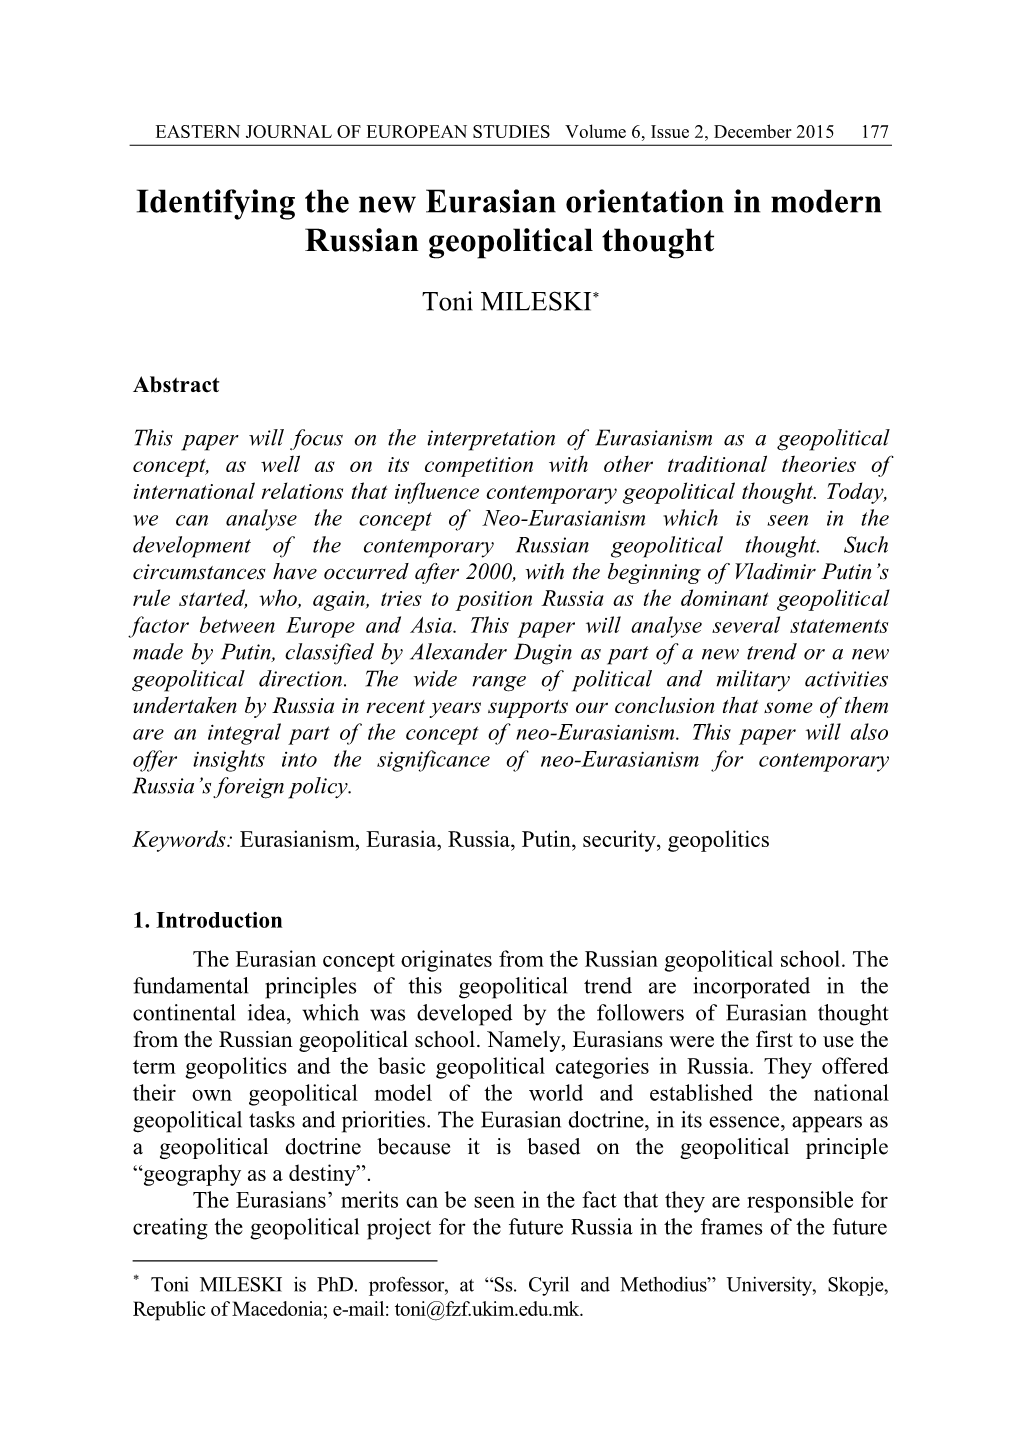 Identifying the New Eurasian Orientation in Modern Russian Geopolitical Thought